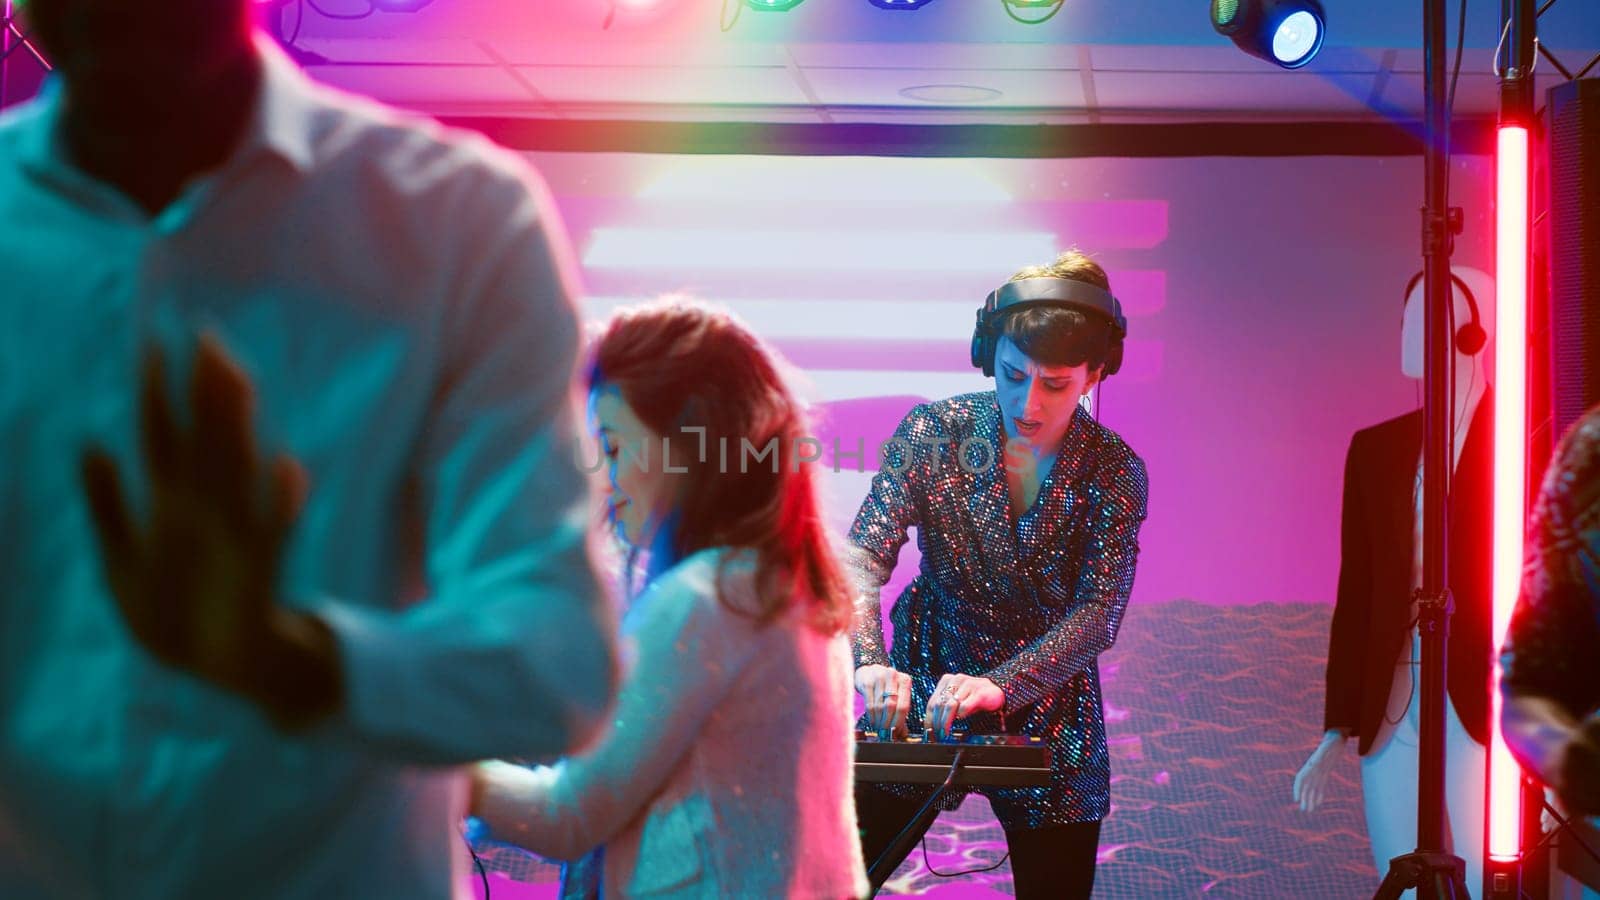 Diverse people dancing on music at club by DCStudio